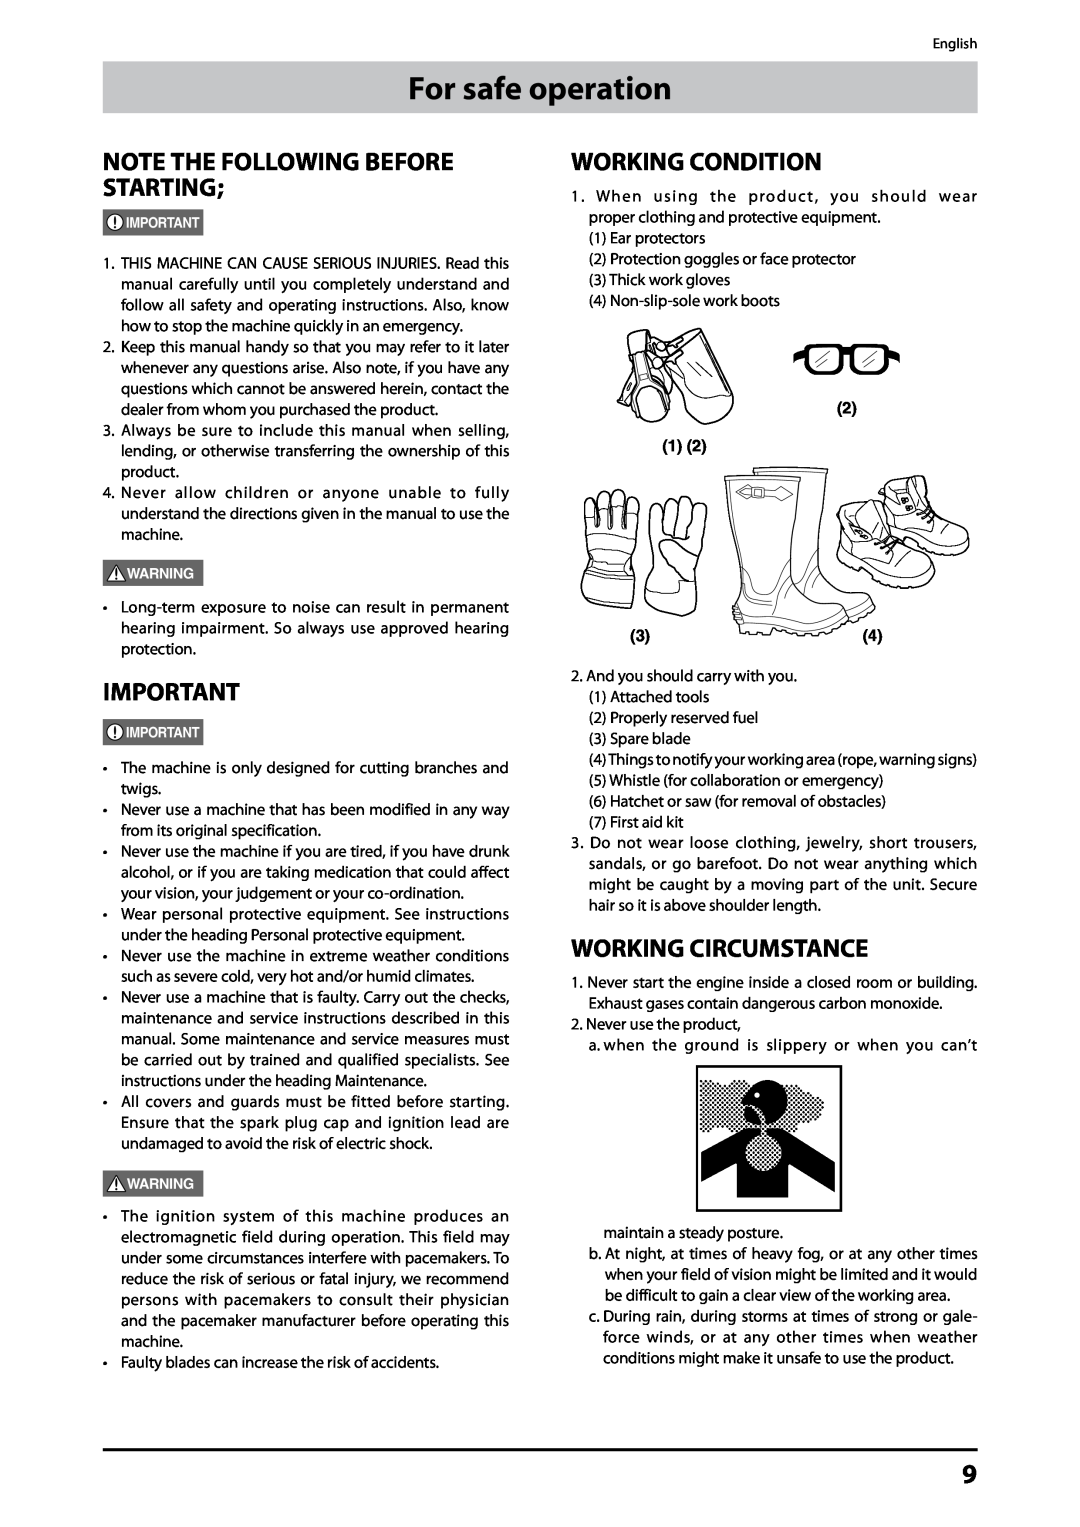 Husqvarna 226HD60S manual For safe operation, Note The Following Before Starting, Working Condition, Working Circumstance 